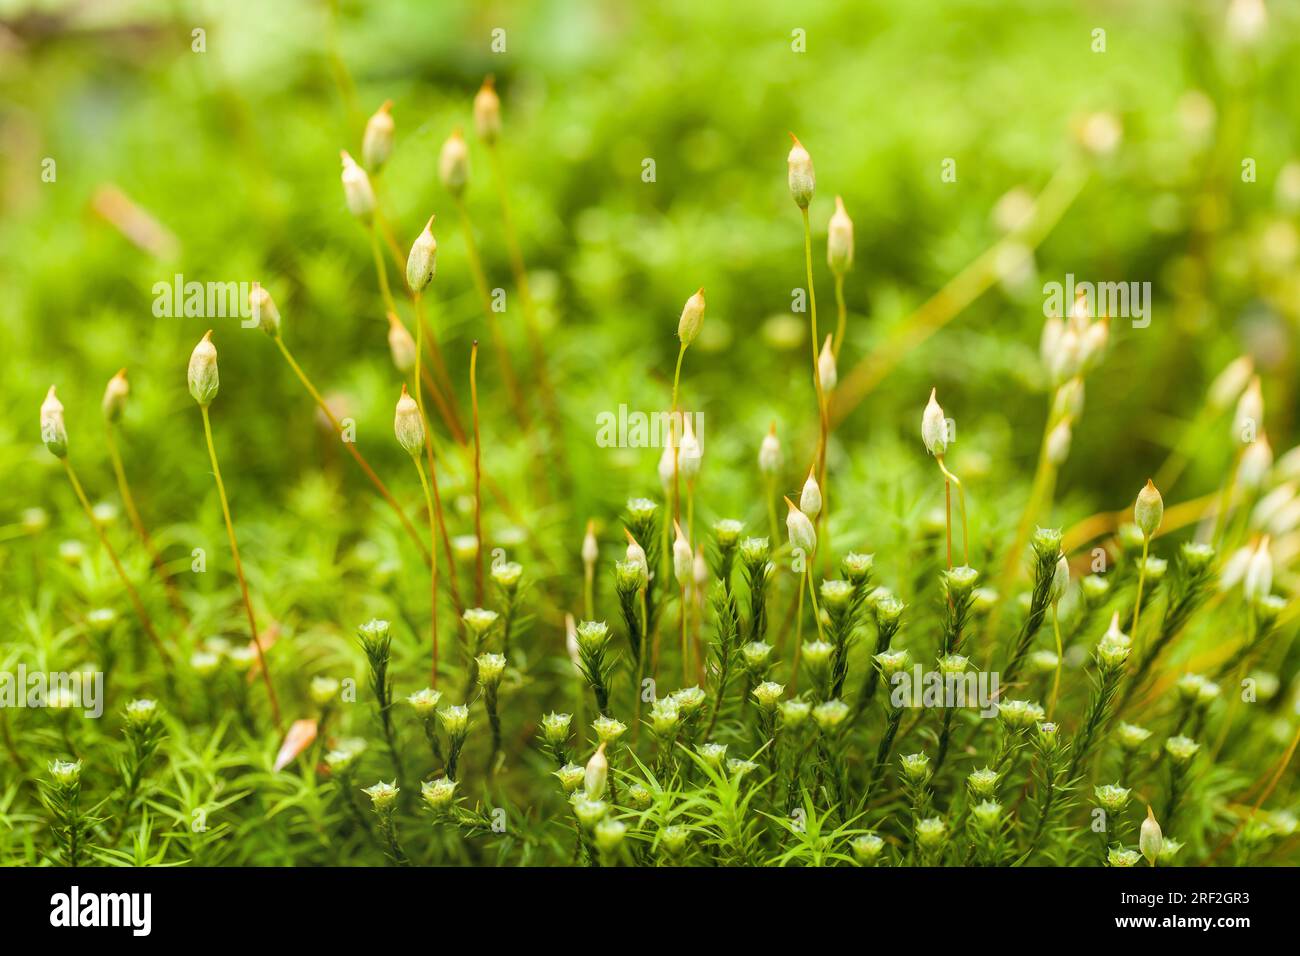 Star Moss, Haircap Moss, Hair Moss (Polytrichum formosum, Polytrichum attenuatum), on forest ground with capsules an perithecia, Germany Stock Photo